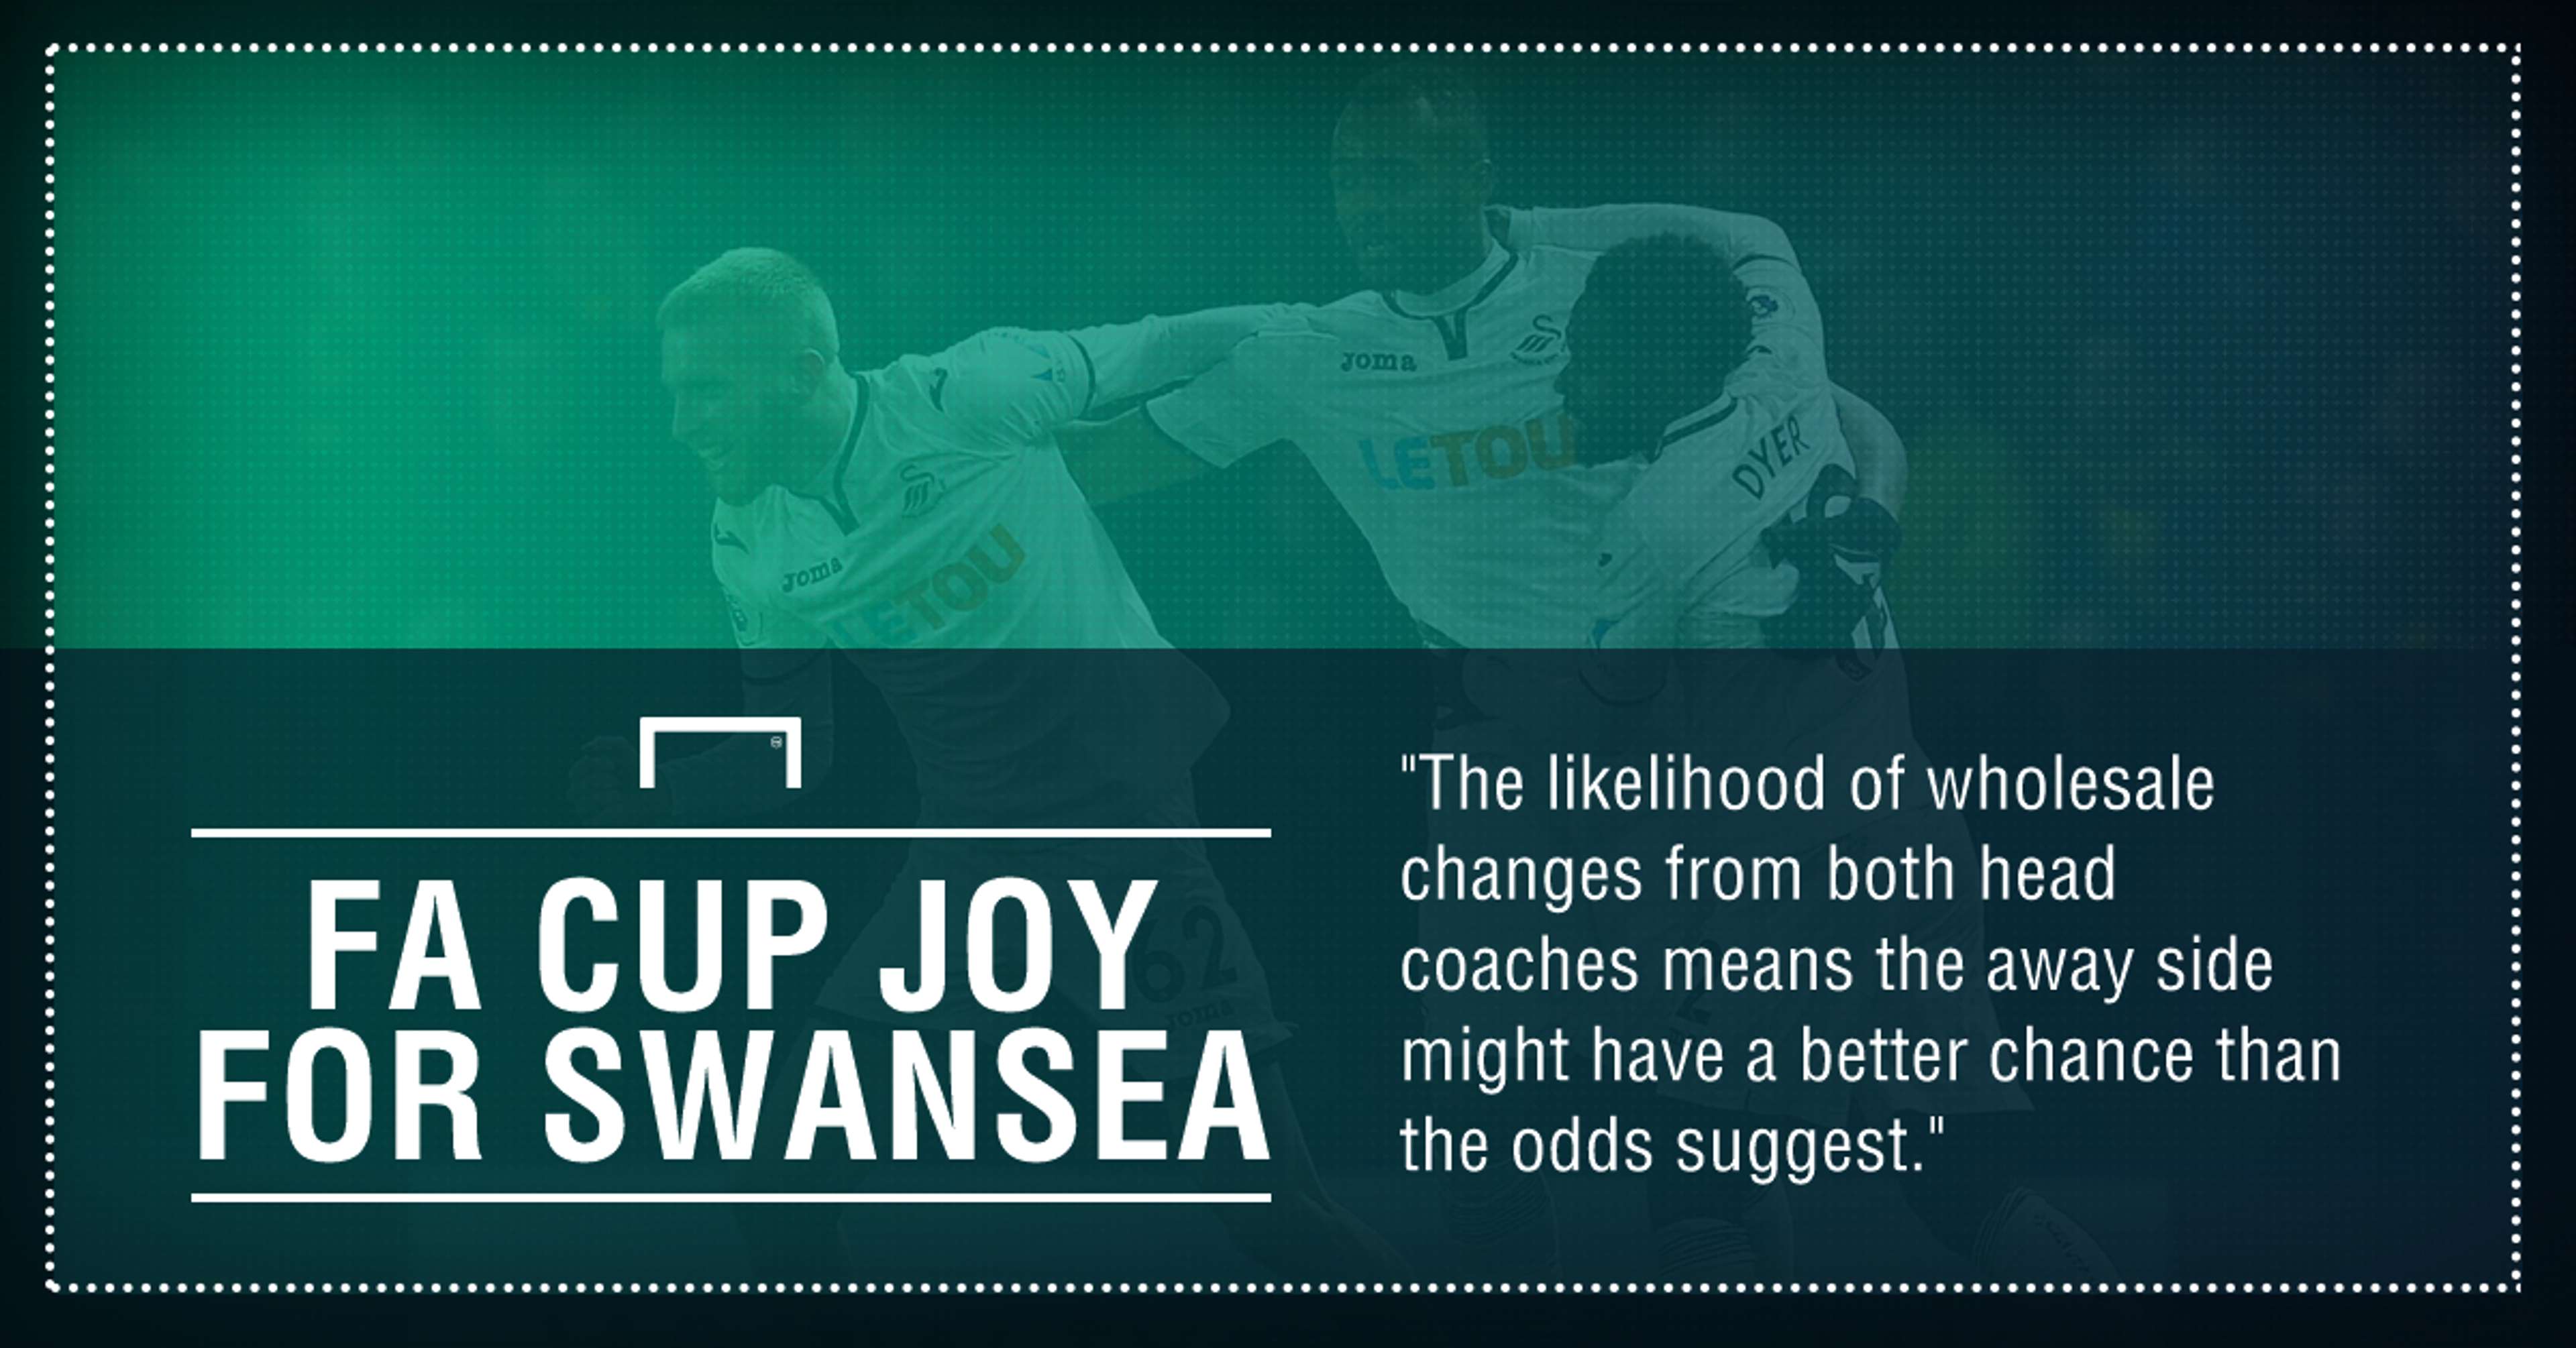 Wolves Swansea graphic